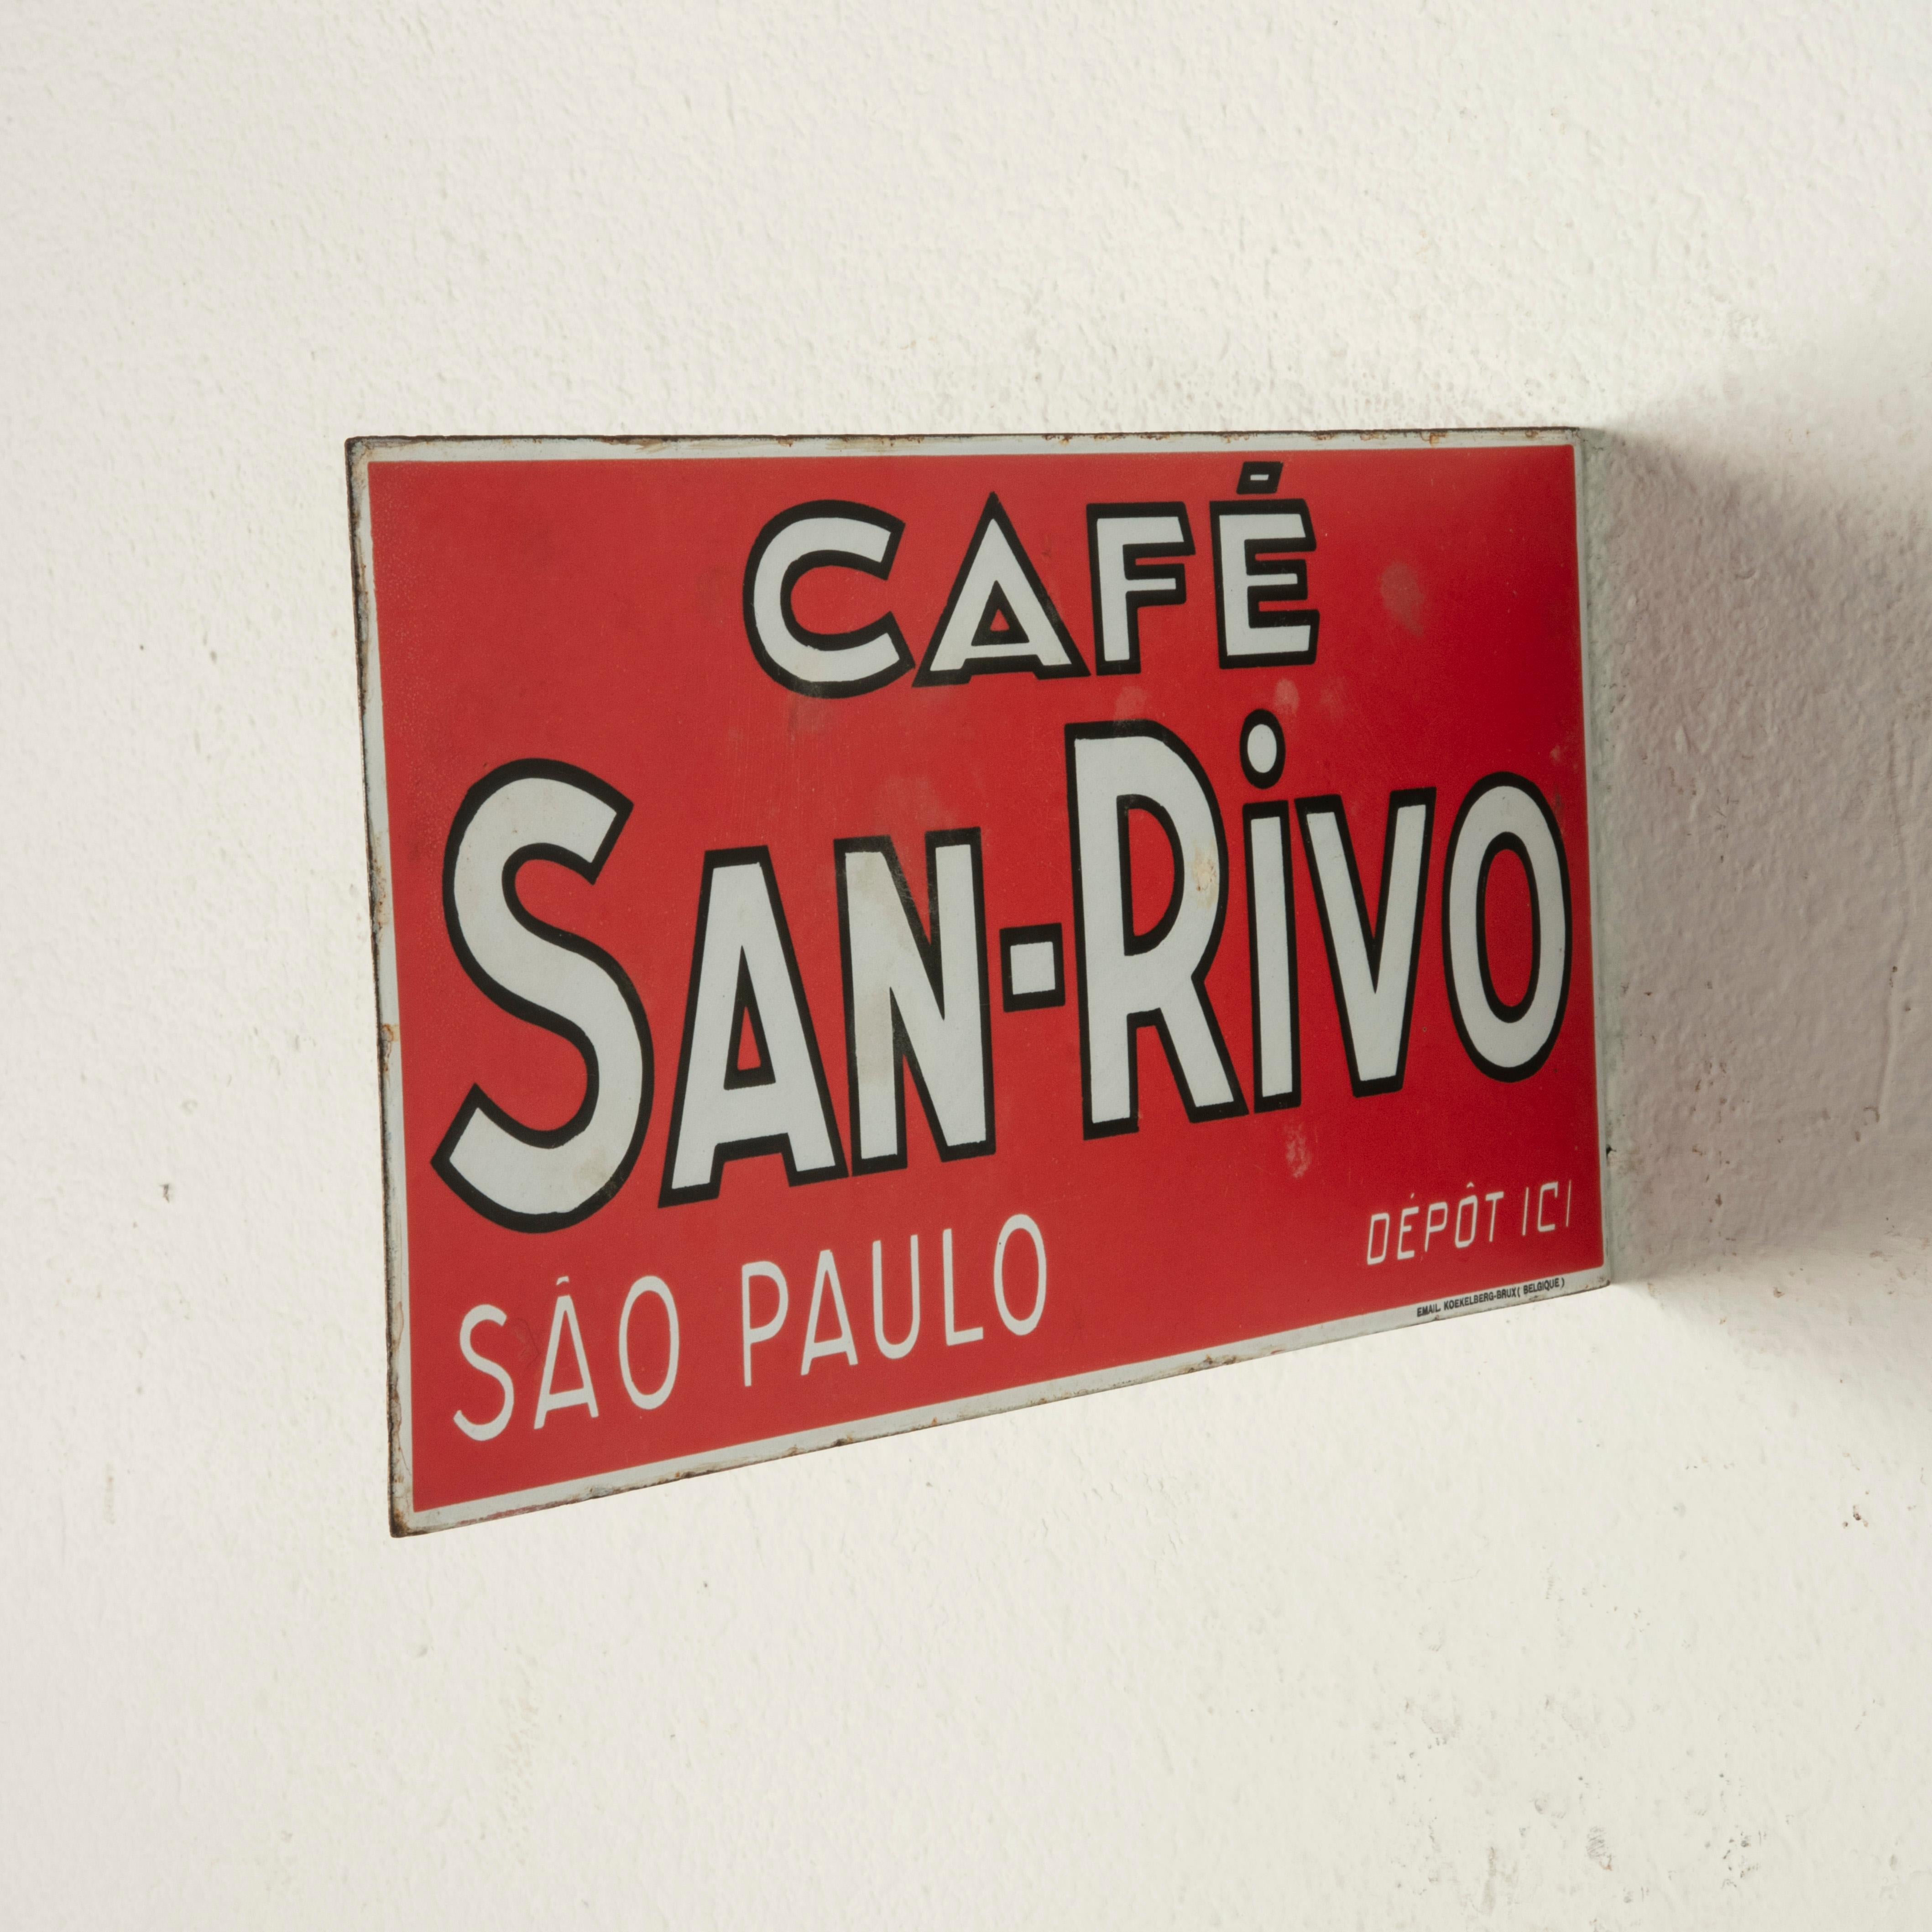 This mid-twentieth century red and white enameled metal sign is double faced and promotes the Cafe San Rivo in Sao Paolo, Brazil. Below is marked Depot Ici indicating that the cafe was also a drop-off location for packages. On one side in small